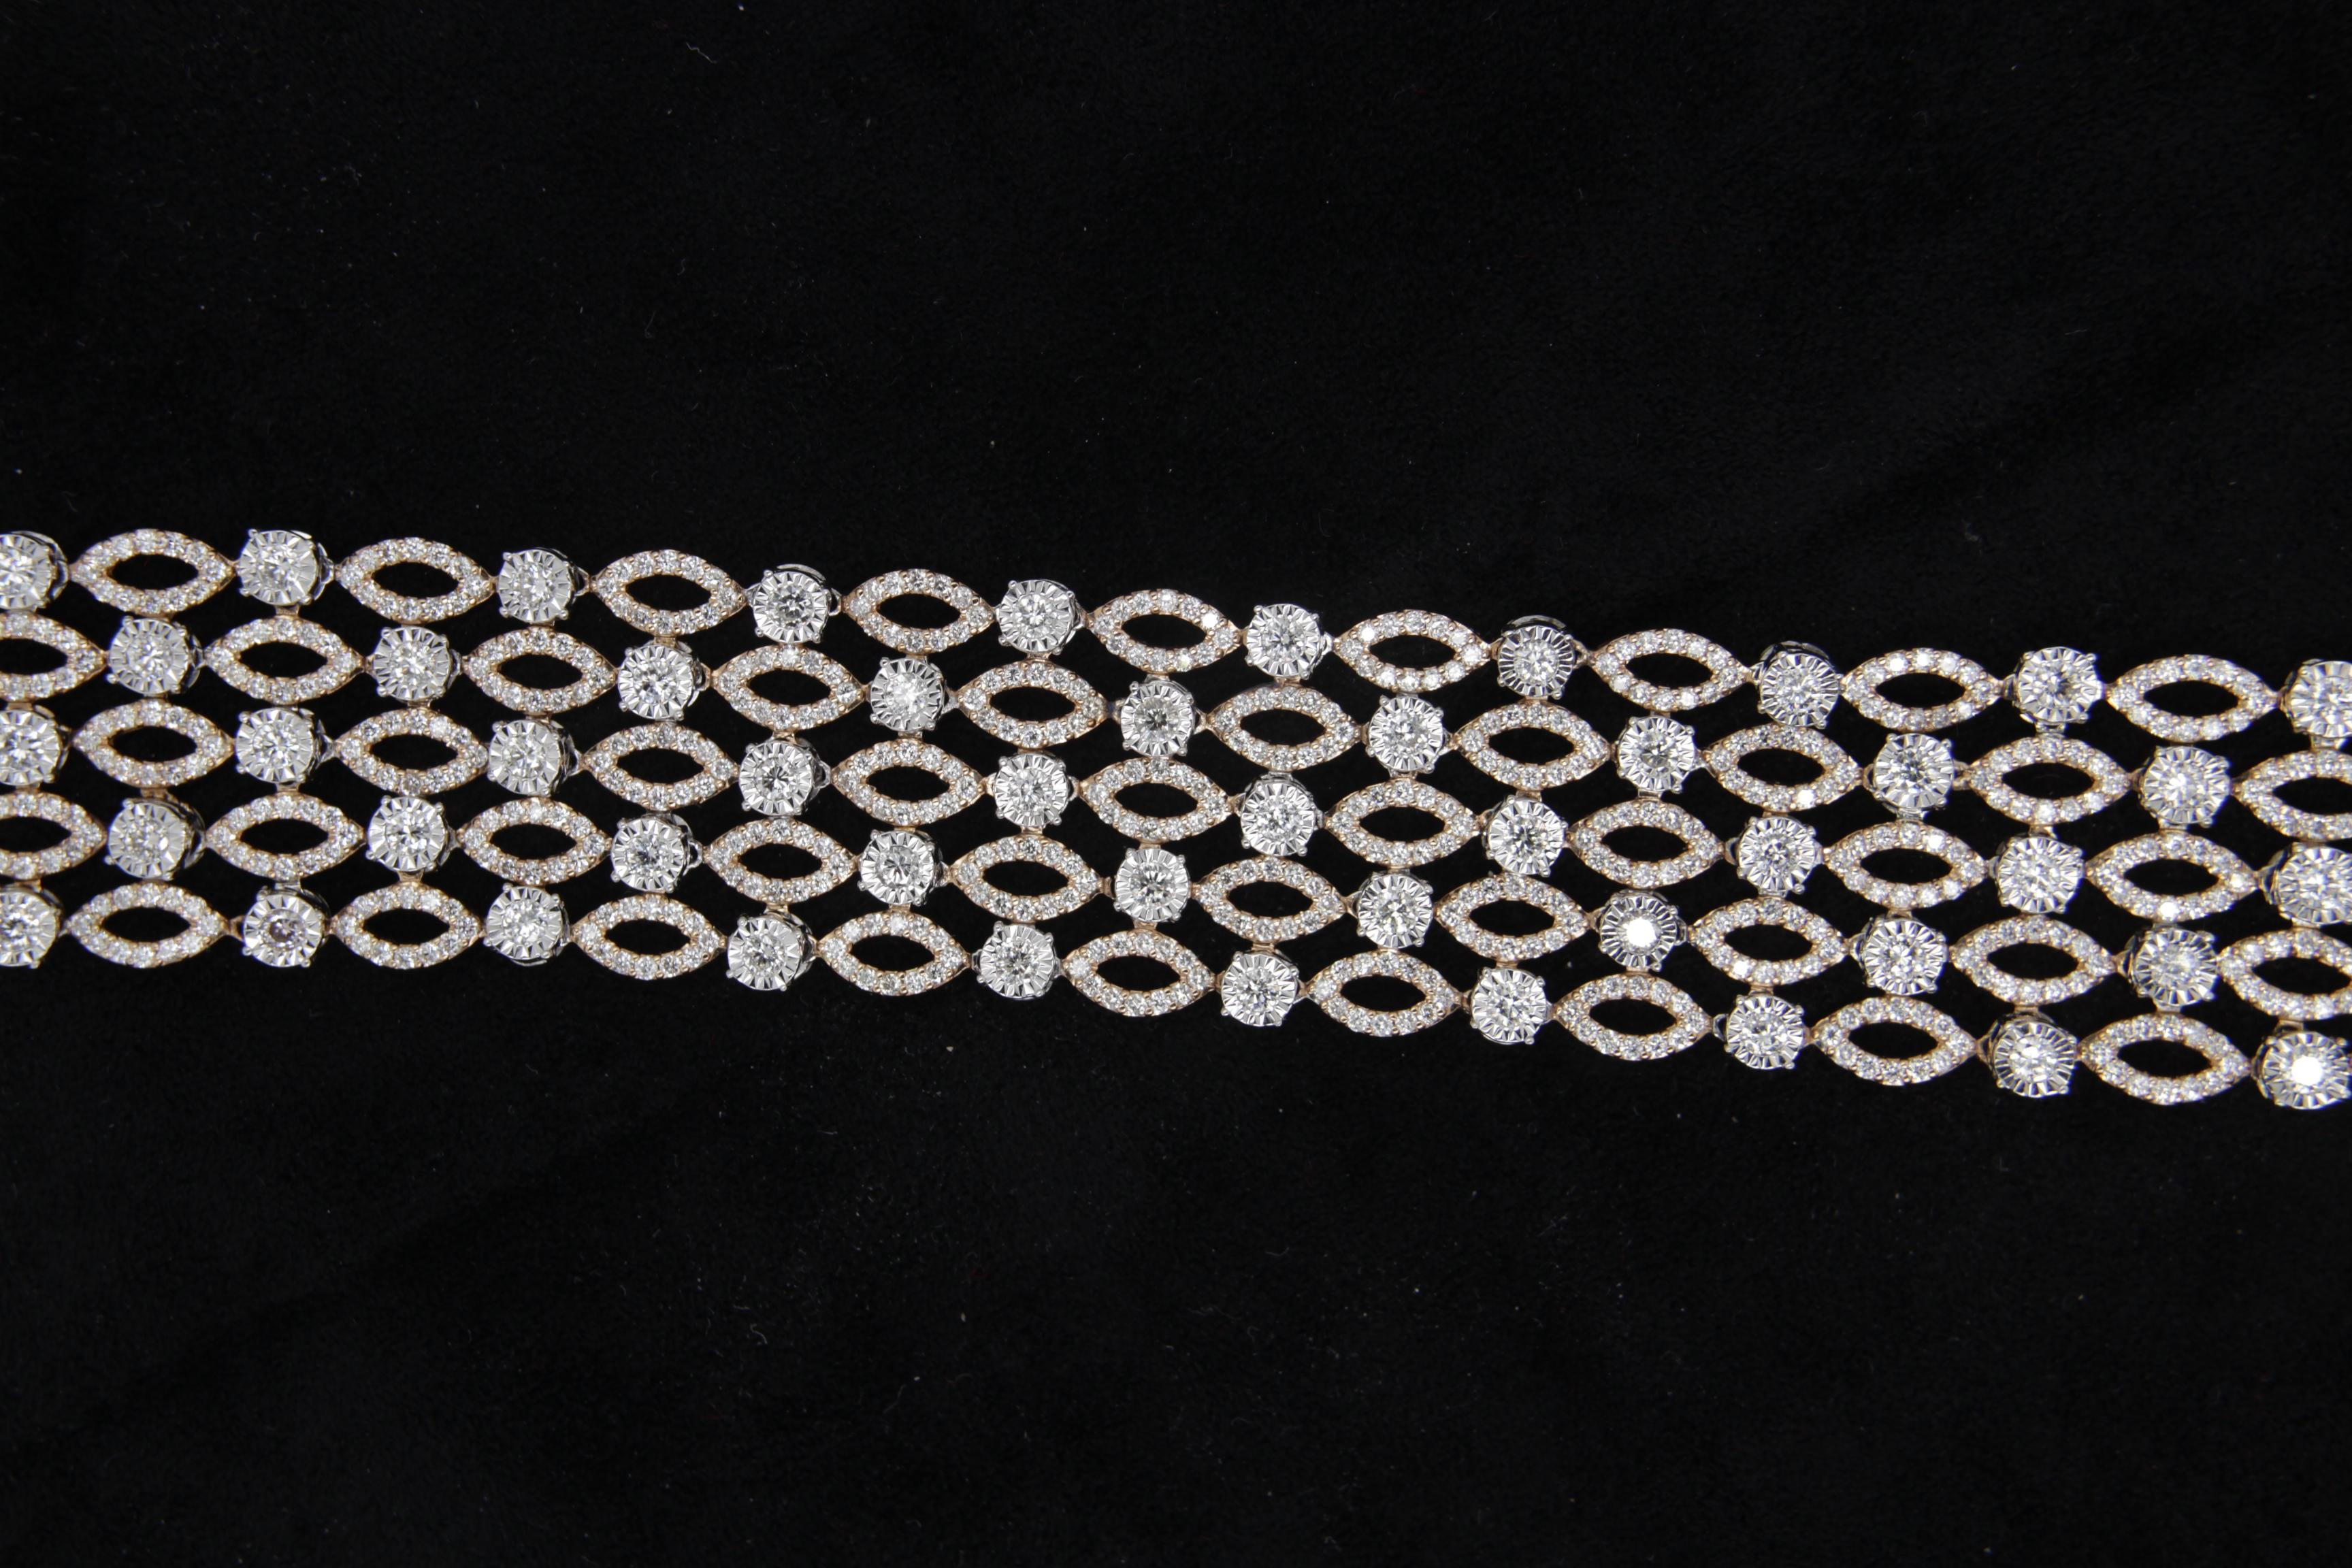 A brand new diamond bracelet in 18 karat gold. The total diamond weight is 8.49 carats and total bracelet weight is 38.36 grams.